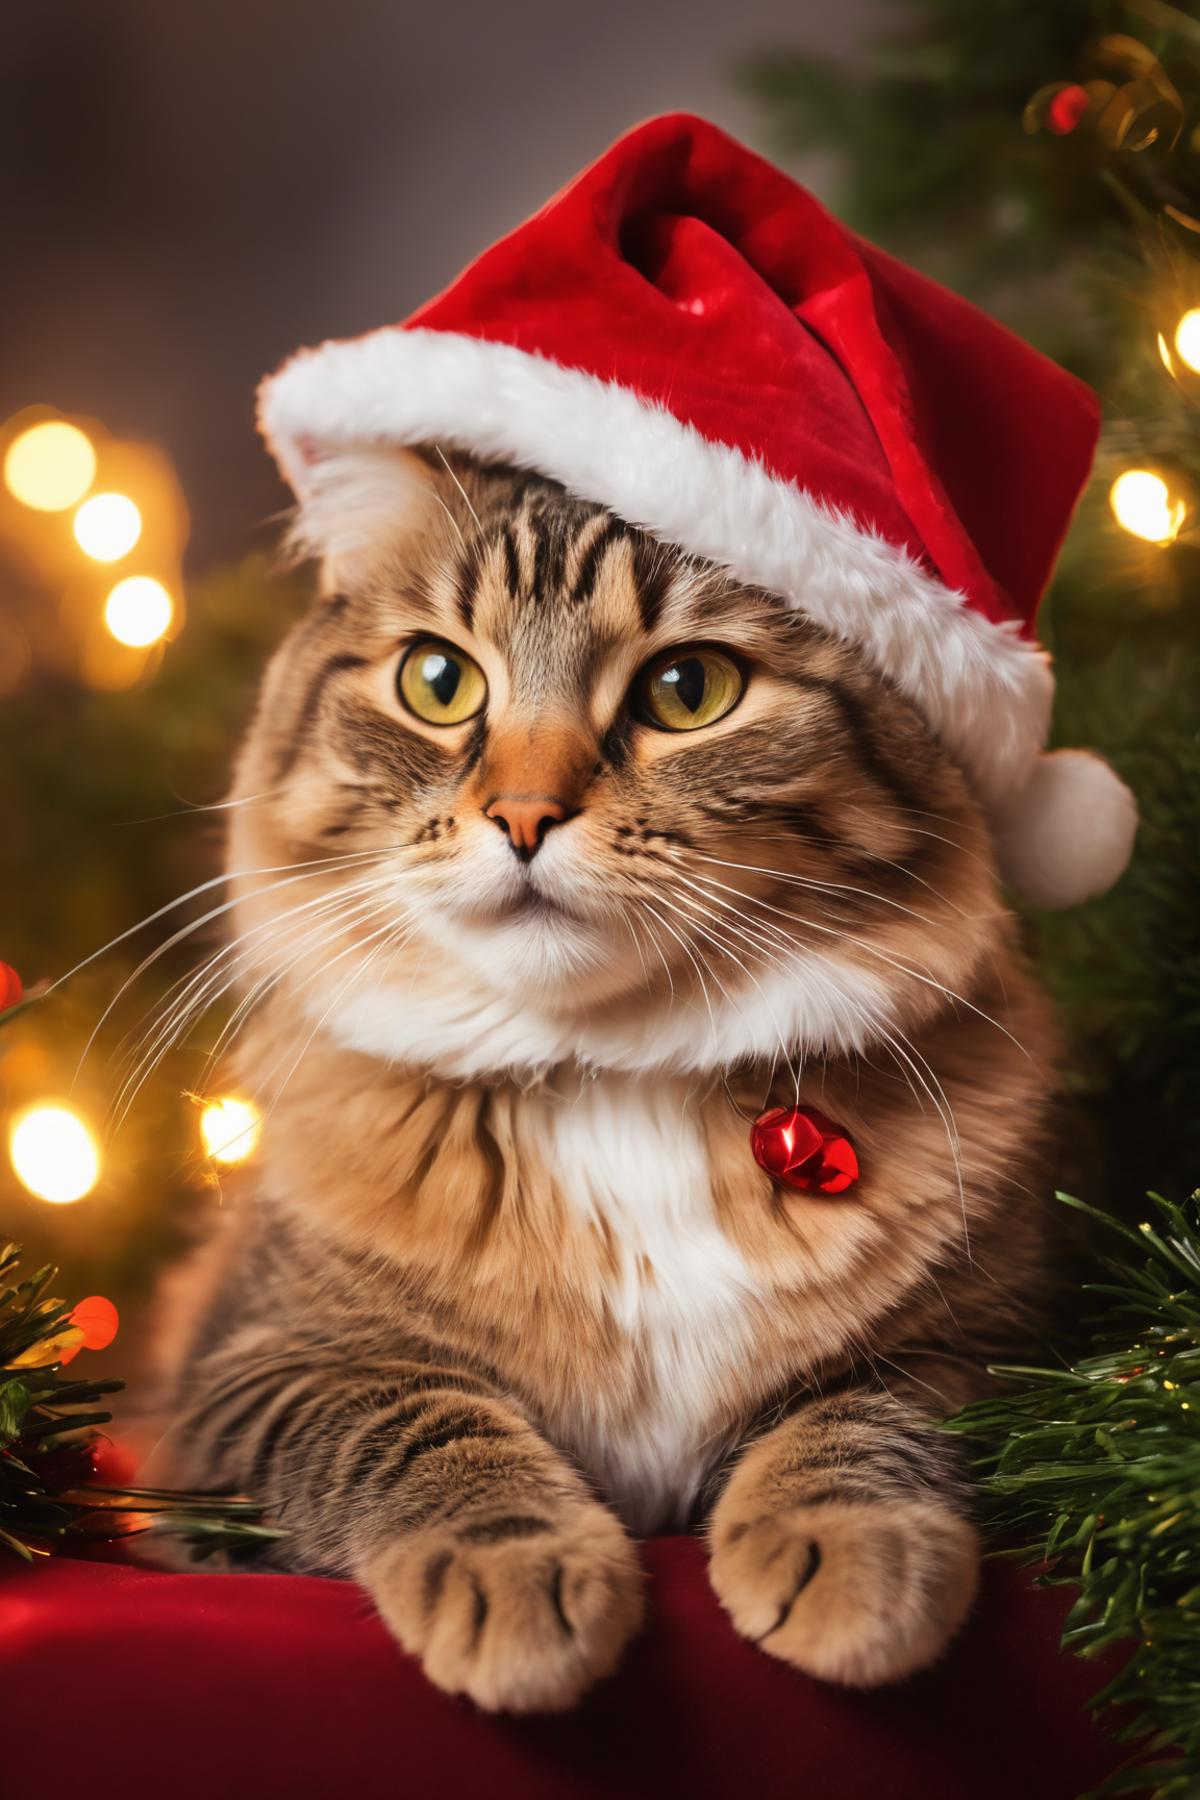 Cute Cat Wearing Santa Hat and Bowtie in Front of Christmas Tree